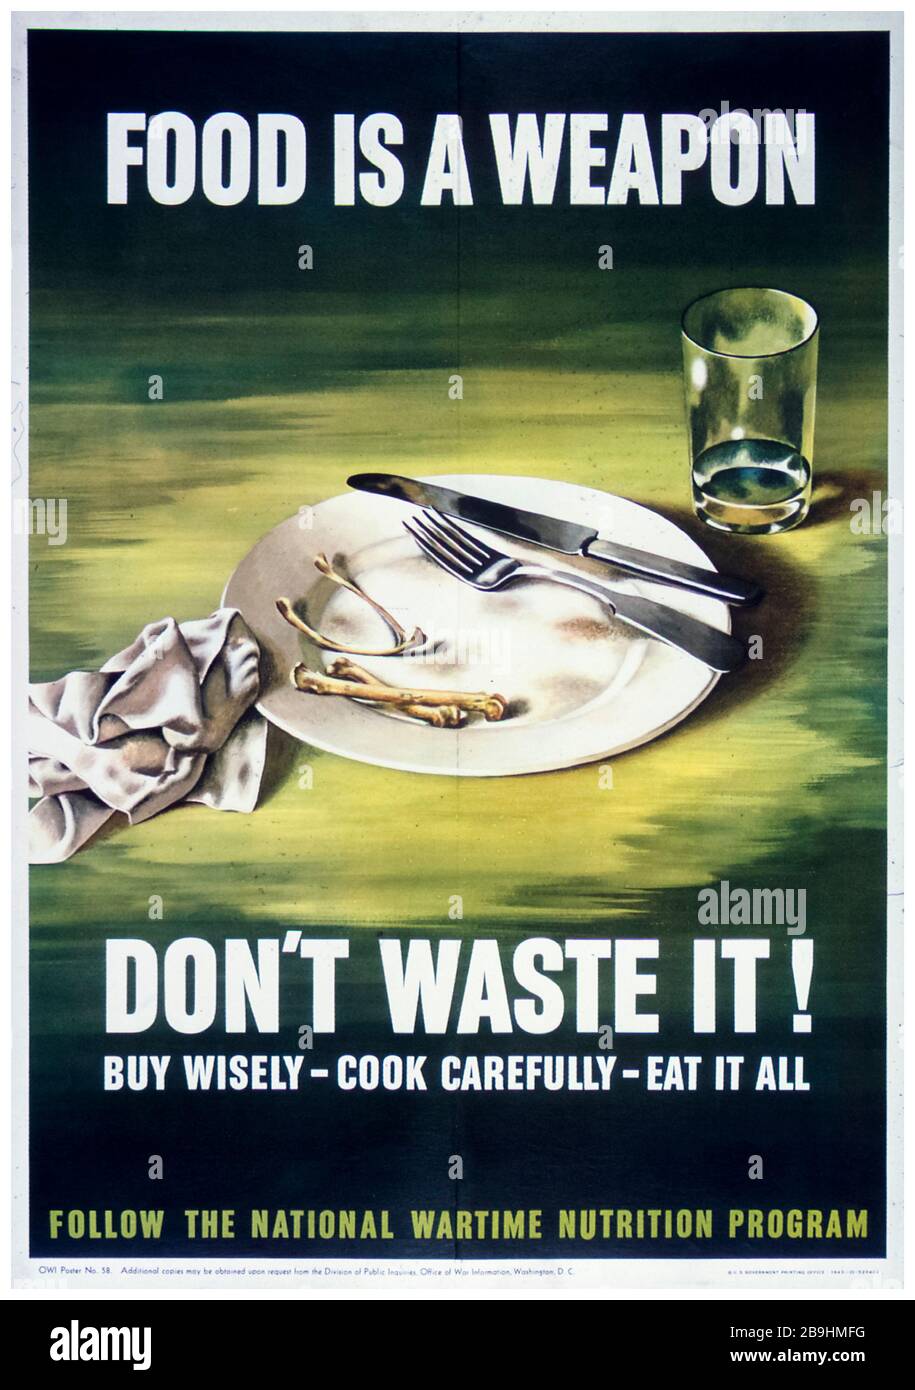 American WW2 Food Rationing Poster, Saving Food Campaign, Food is a Weapon - Don't Waste it, 1941-1945 Stockfoto